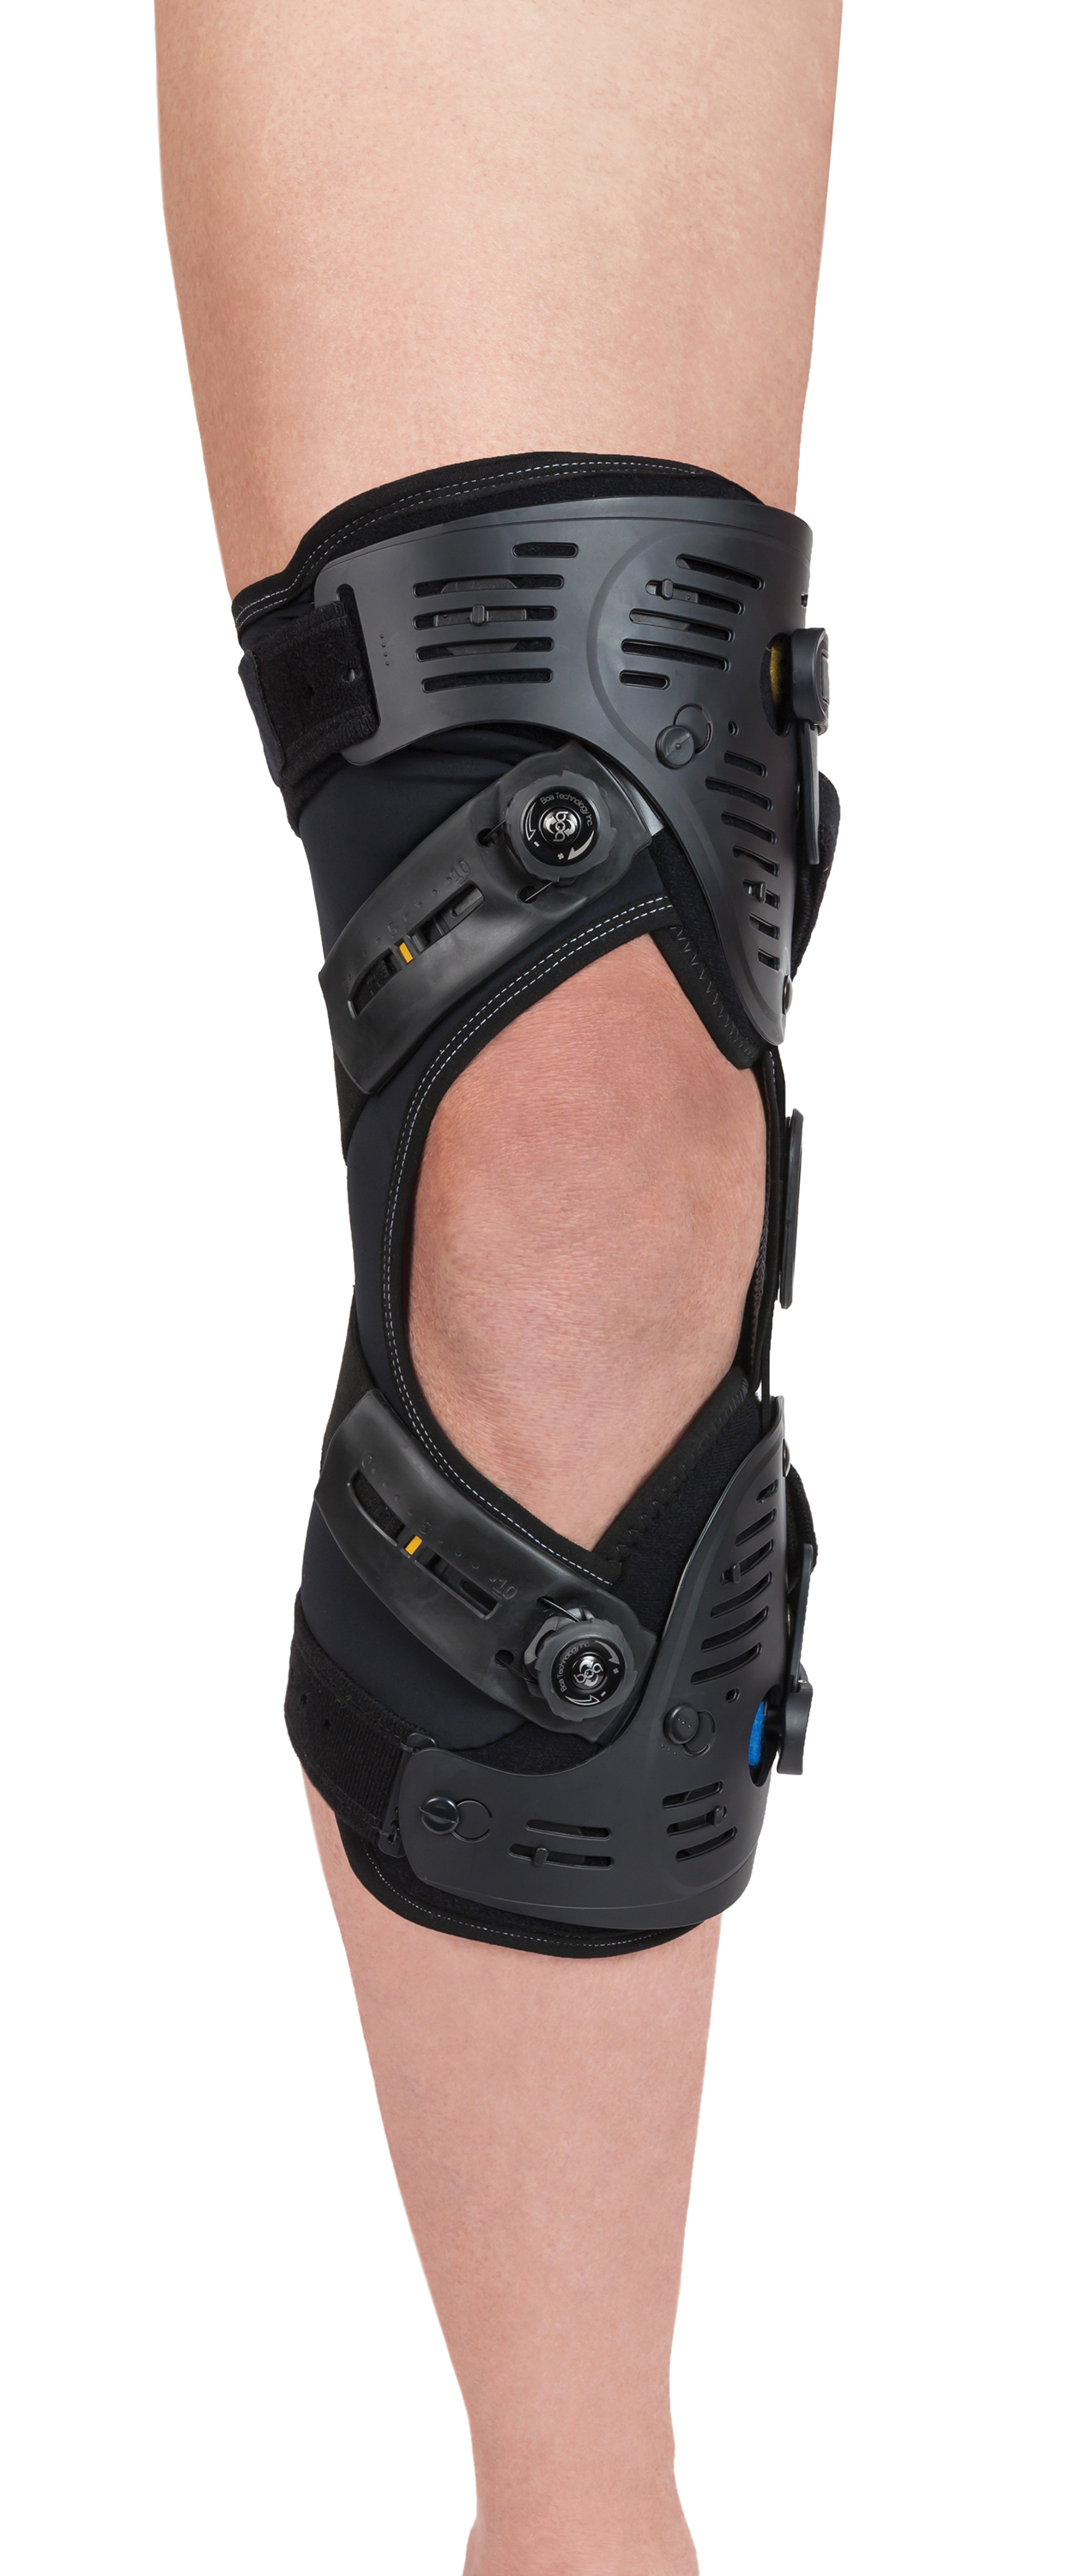 PUSH Sports Arthritis Knee Brace : leaf spring hinges provide support to  relieve arthritis knee pain